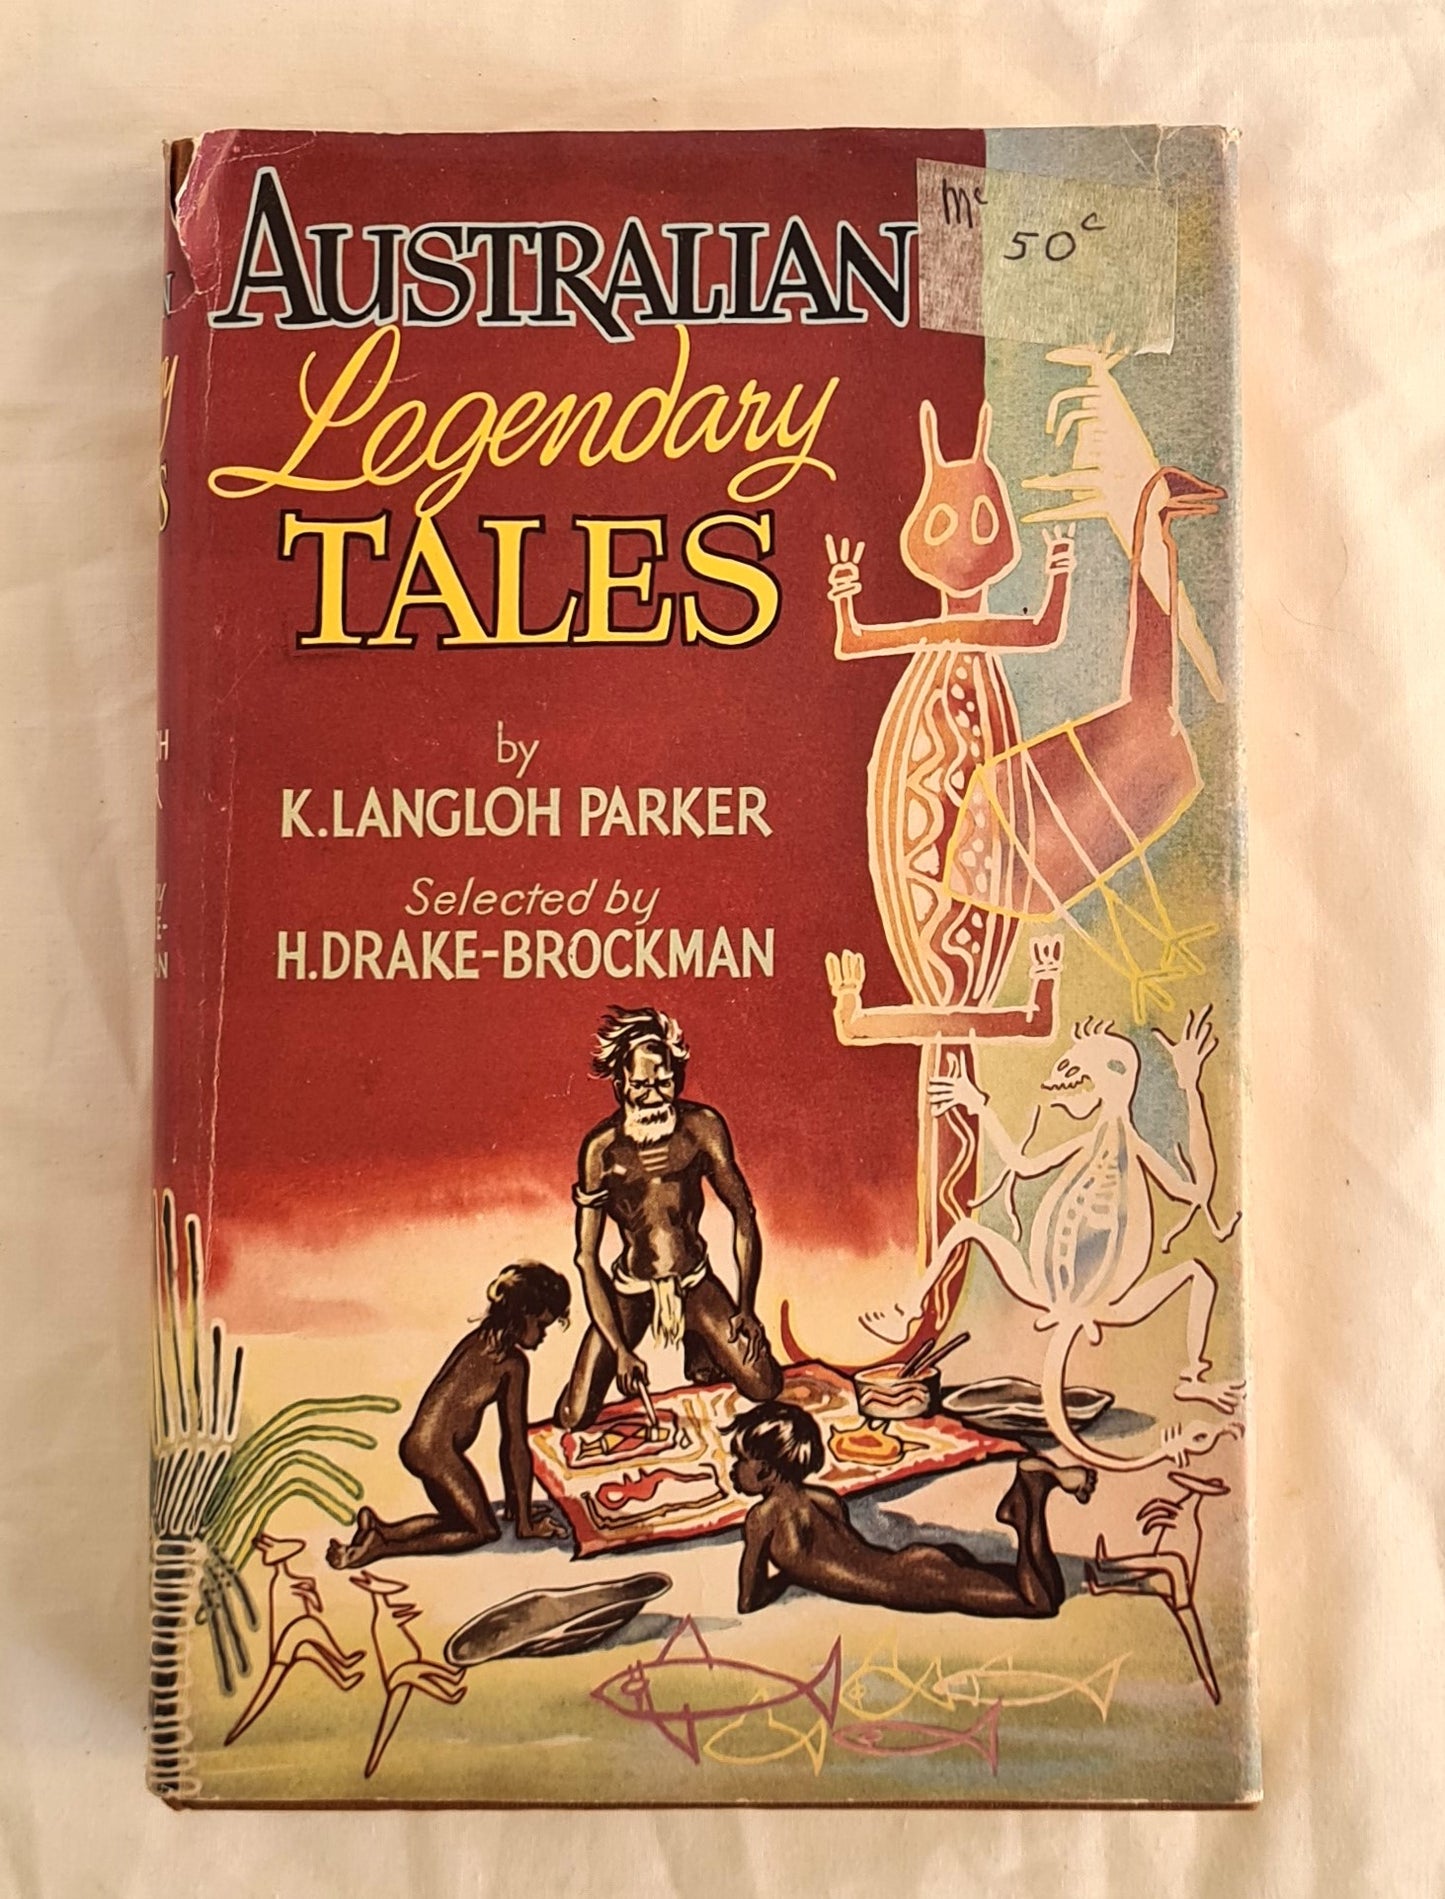 Australian Legendary Tales  Collected by K. Langloh Parker  Selected and edited by H. Drake-Brockman  Illustrated by Elizabeth Durack